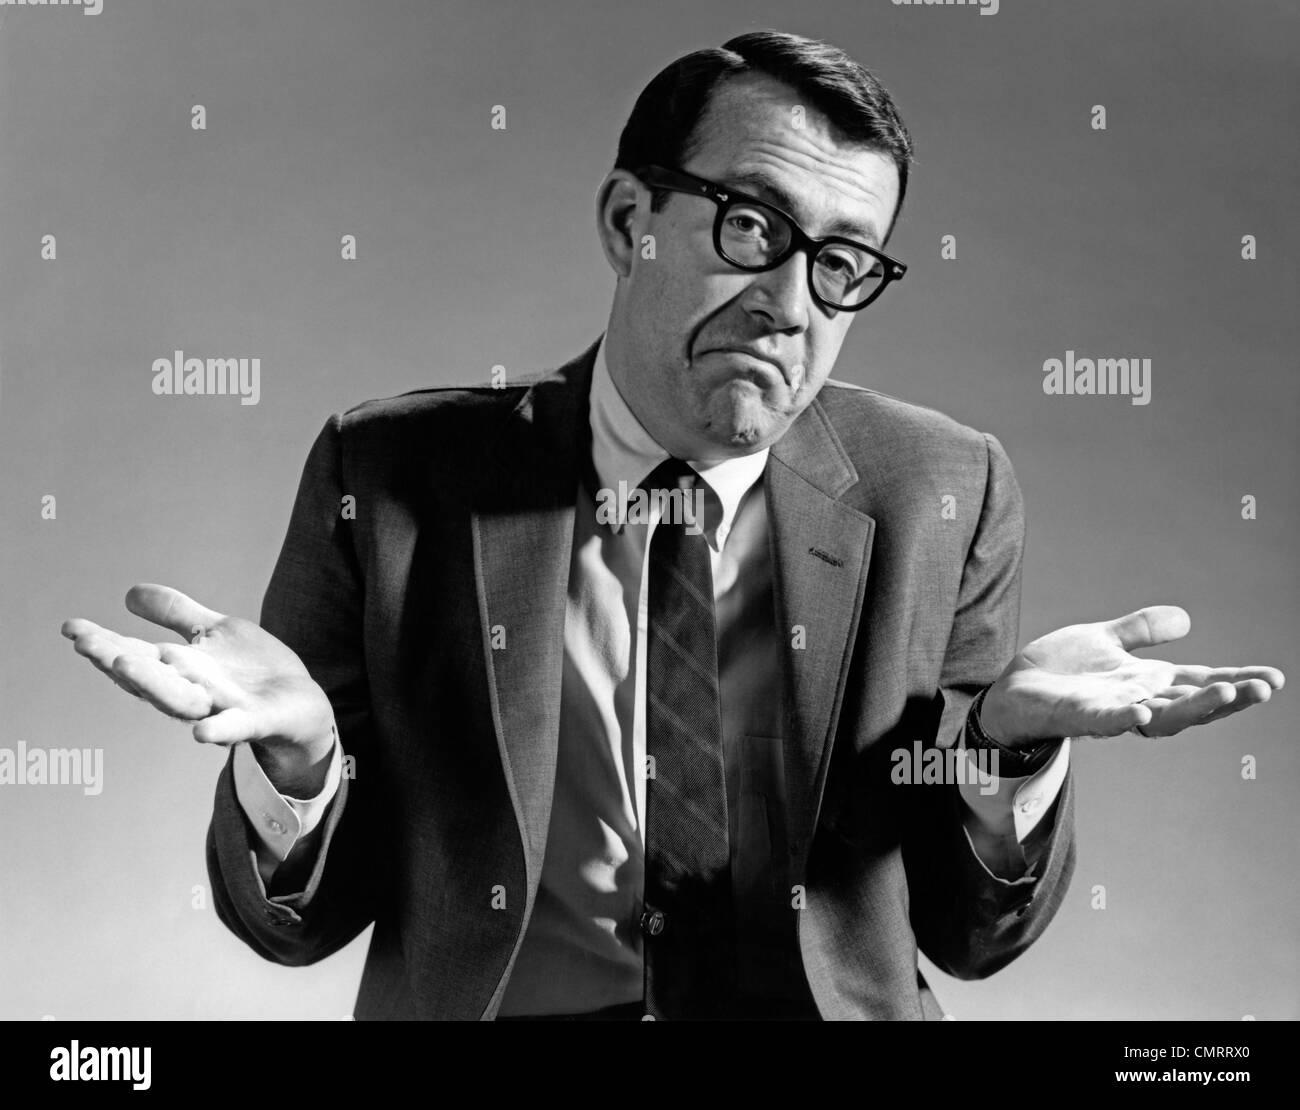 1960s BUSINESSMAN SHRUGGING SHOULDERS LOOKING AT CAMERA HANDS EXTENDED PALMS UP Stock Photo